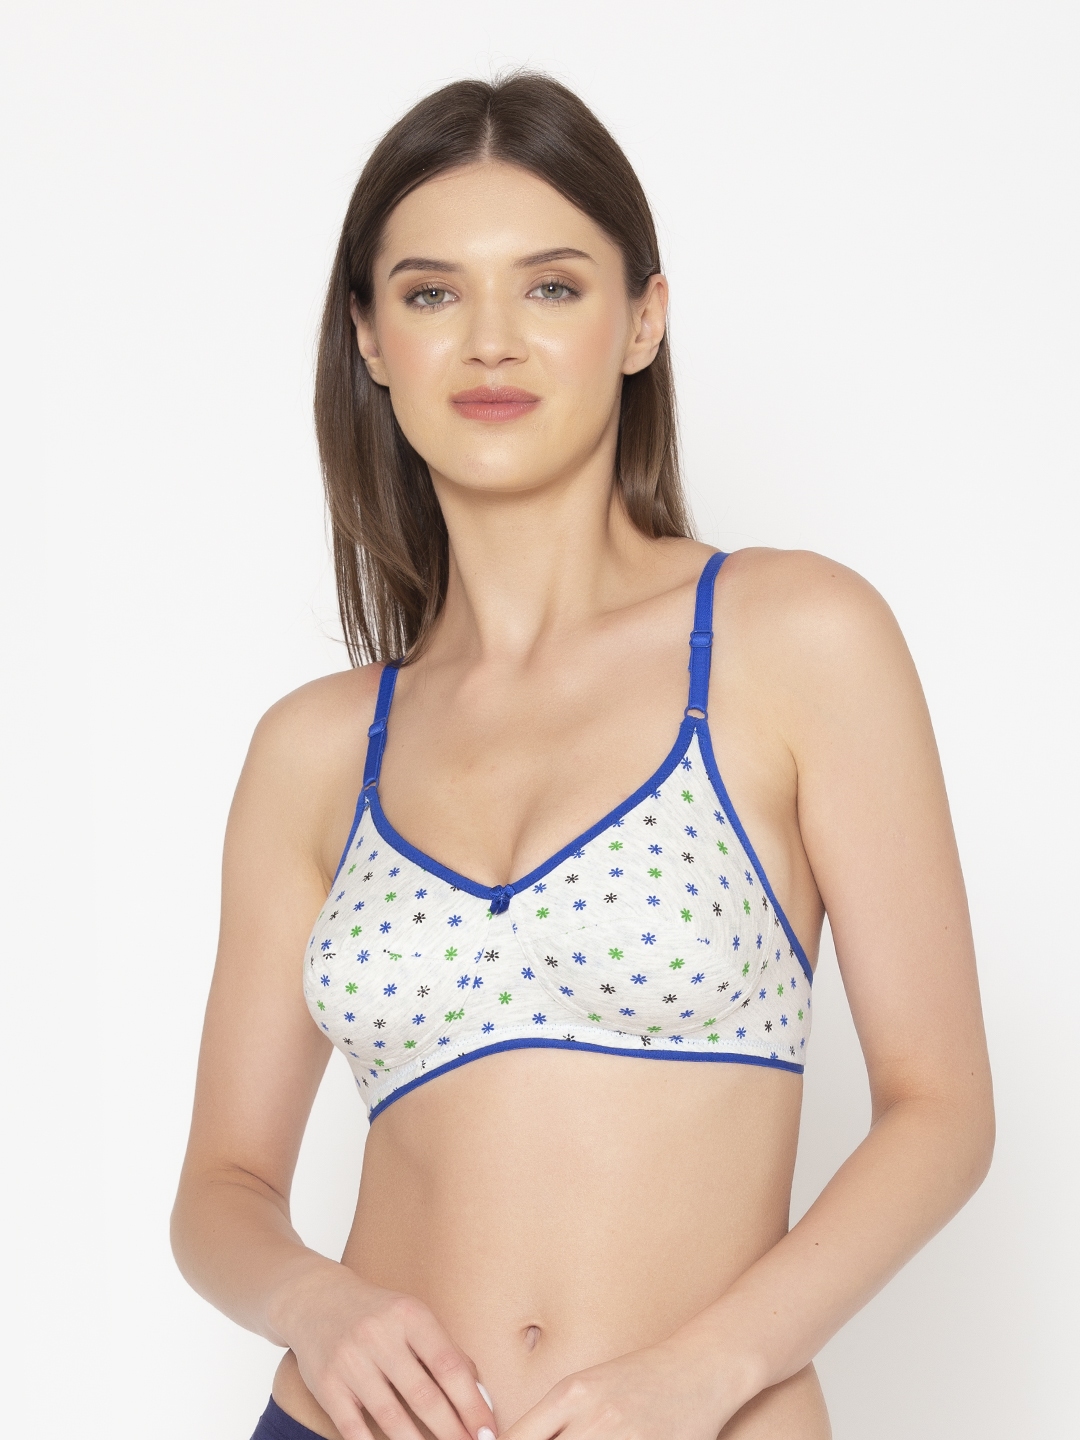 Buy Groversons paris beauty Crafted With Lace Non Wired Padded Bra